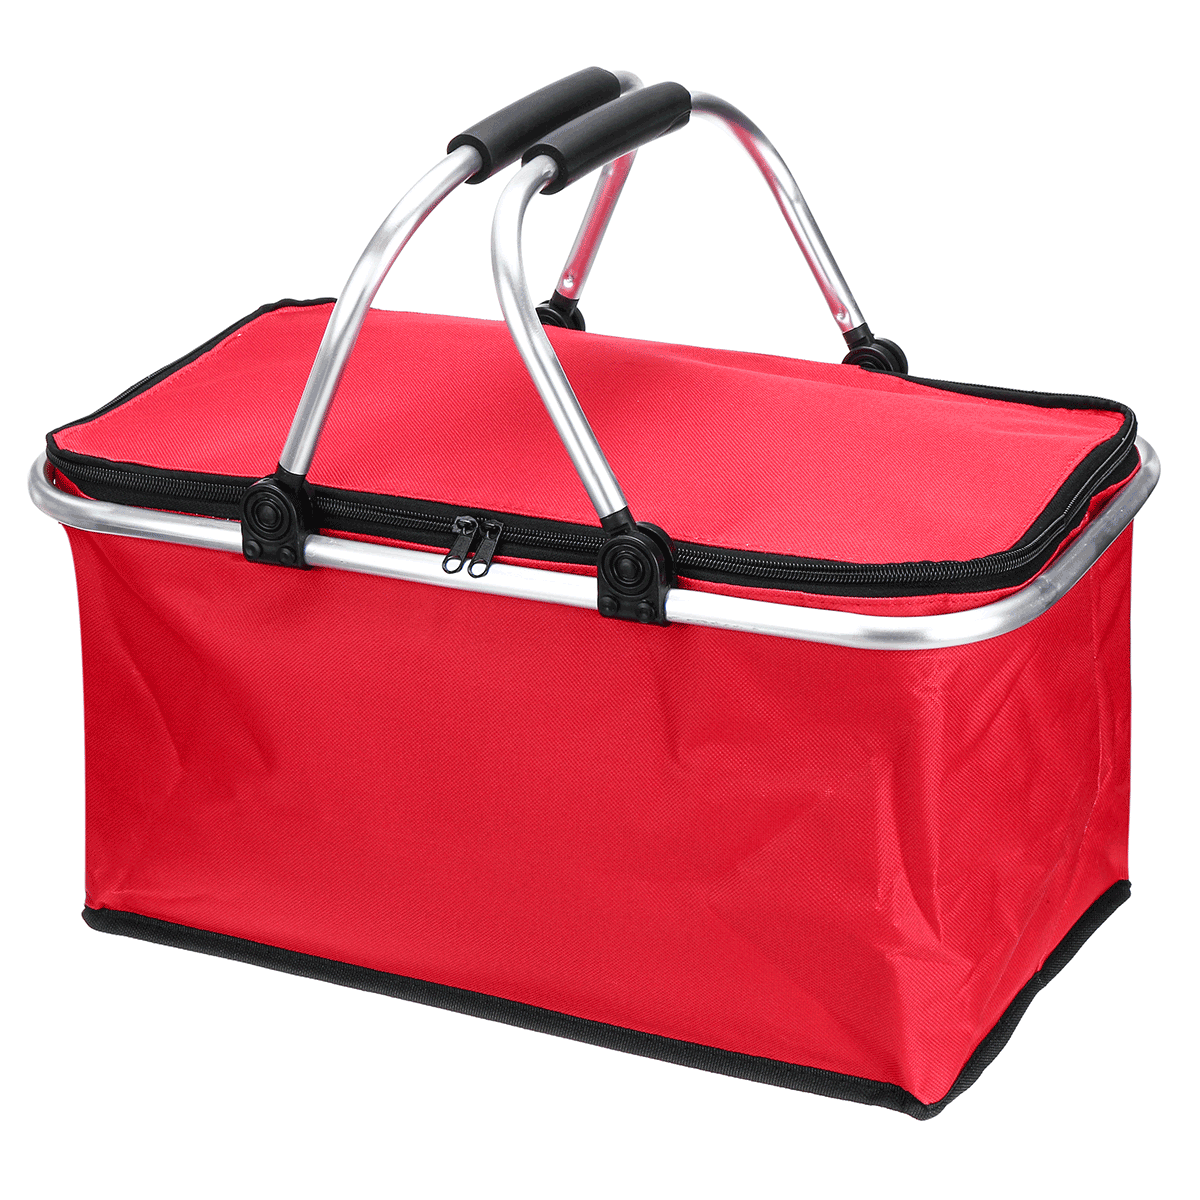 30L Large Size Insulated Heat & Cooling Picnic Basket Bag Folding Handbags Zip Waterproof Closure Basket Insulation Food Storage with Carrying Handles Camping Picnic Hiking